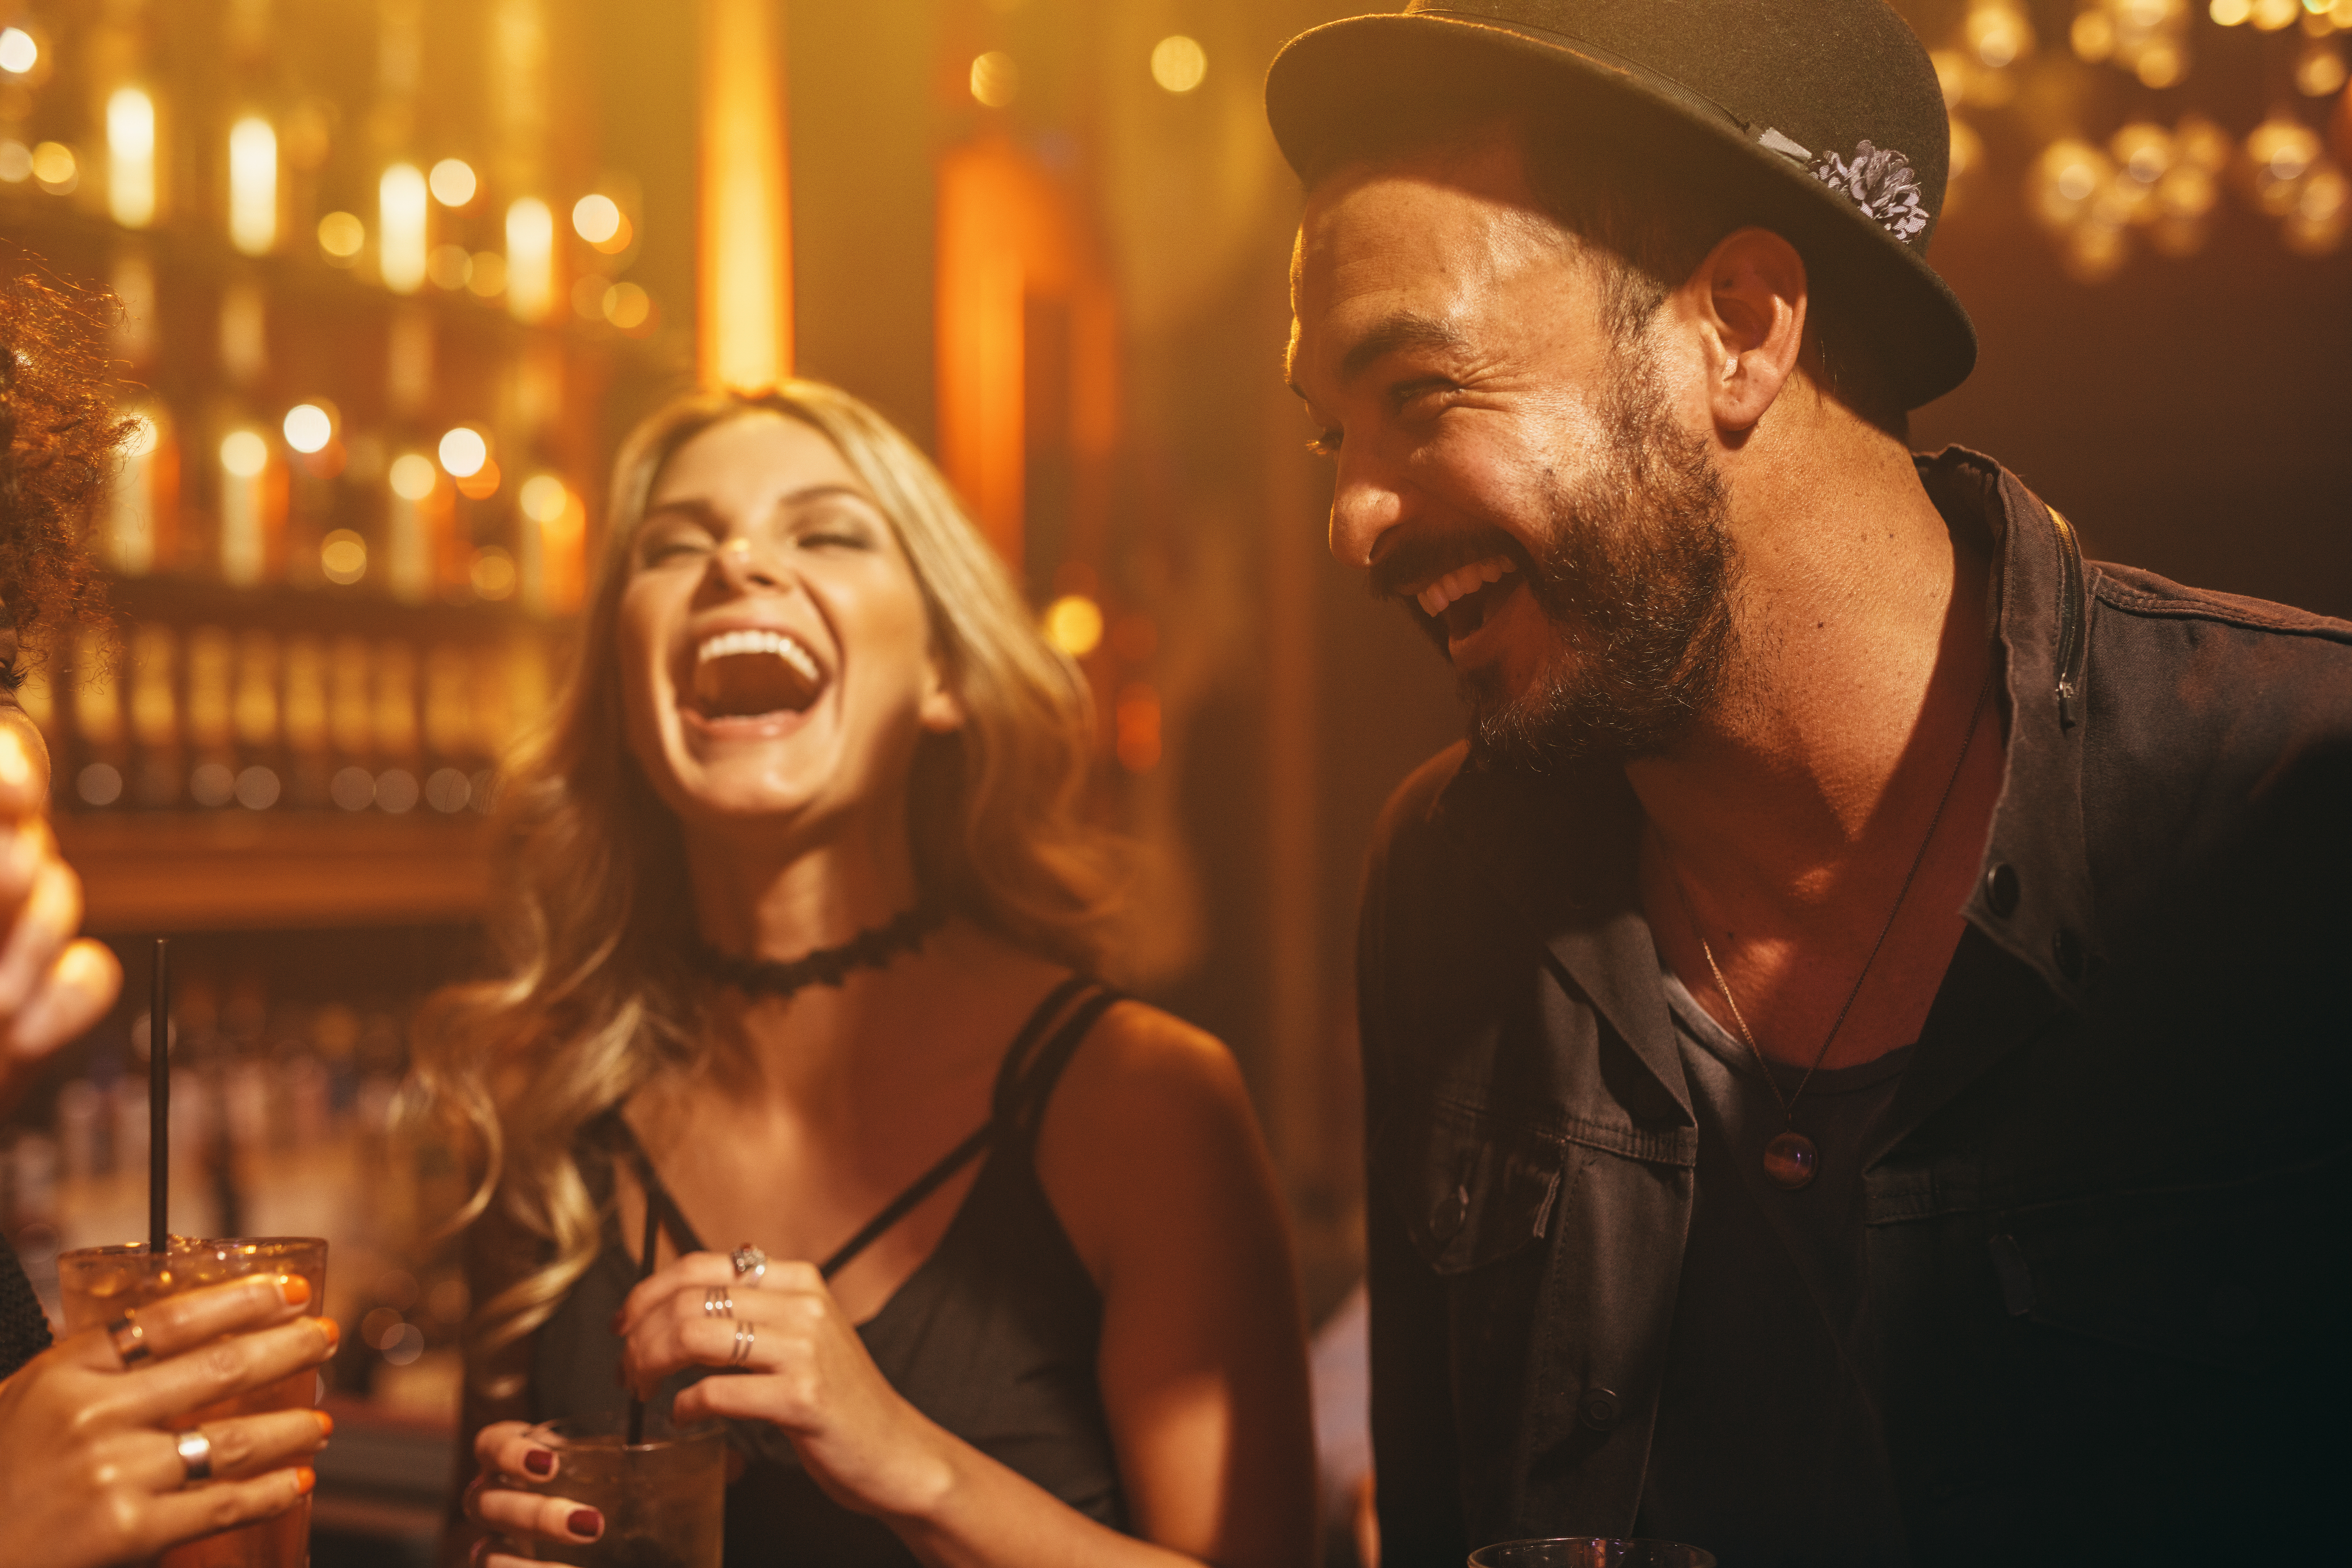 A man and woman laughing over drinks | Source: Shutterstock